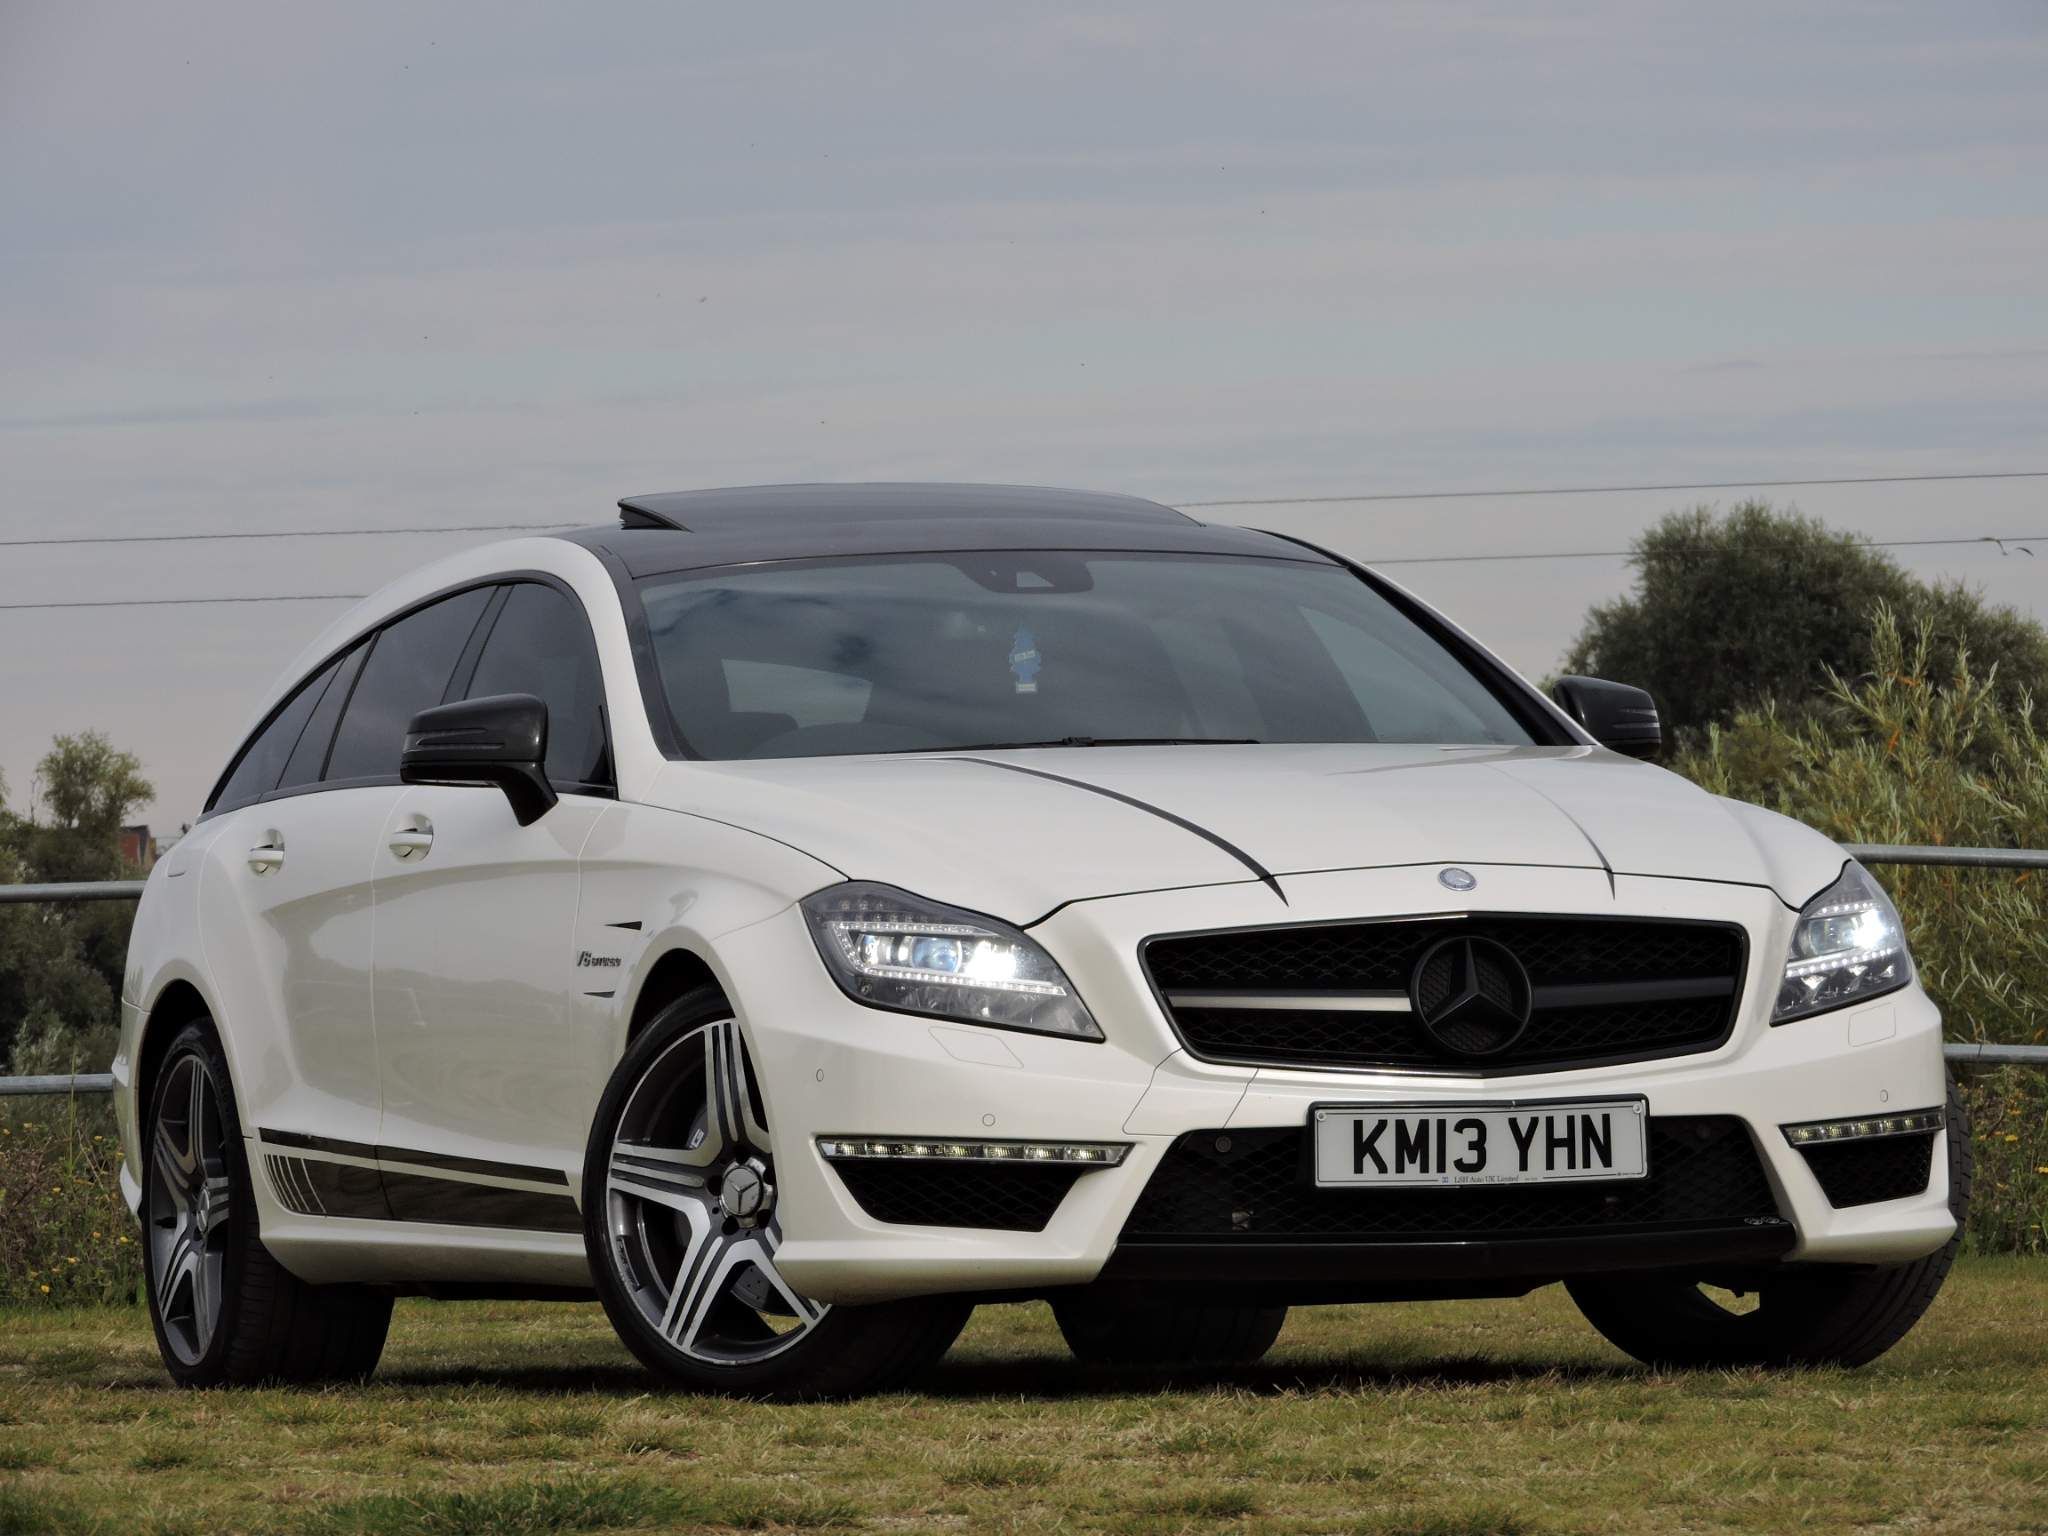 Mercedes-Benz CLS 5.5 CLS63 BlueEFFICIENCY AMG Shooting Brake 7G-Tronic Plus (s/s) 5dr - £29490